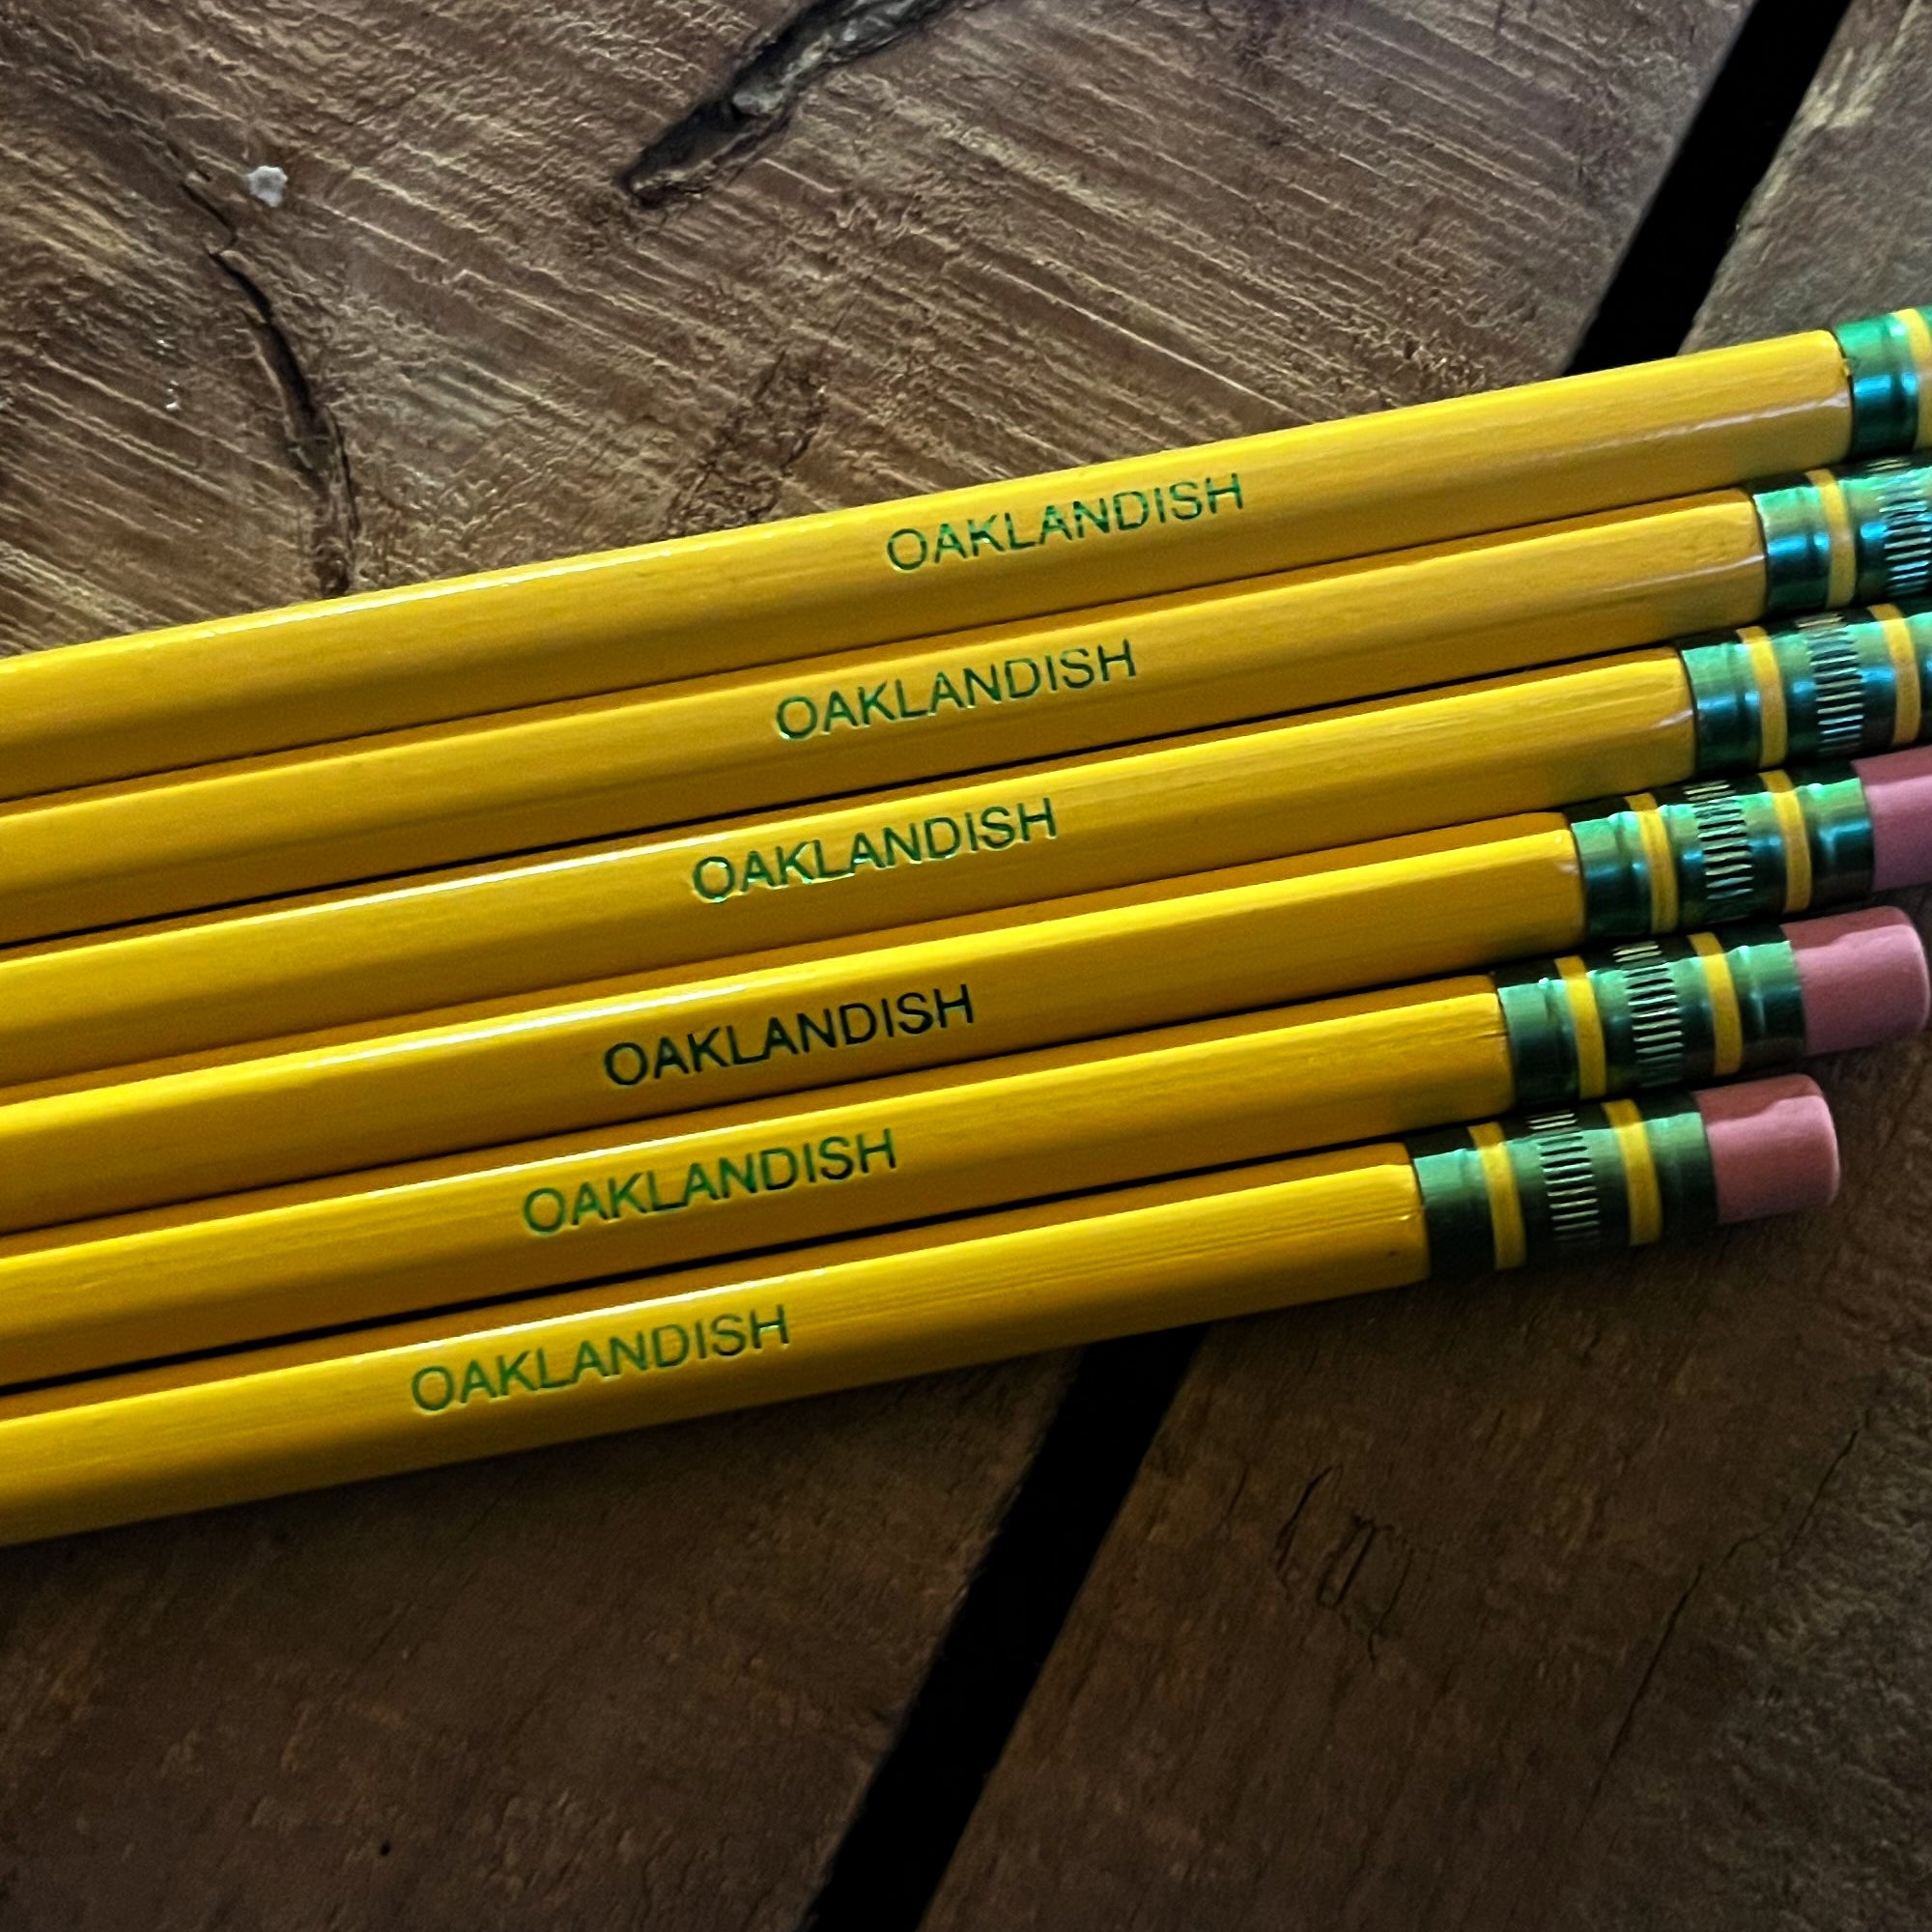 Close up of 6 yellow Ticonderoga No. 2 hex pencils with Oaklandish wordmark on the side on outdoor wood deck.